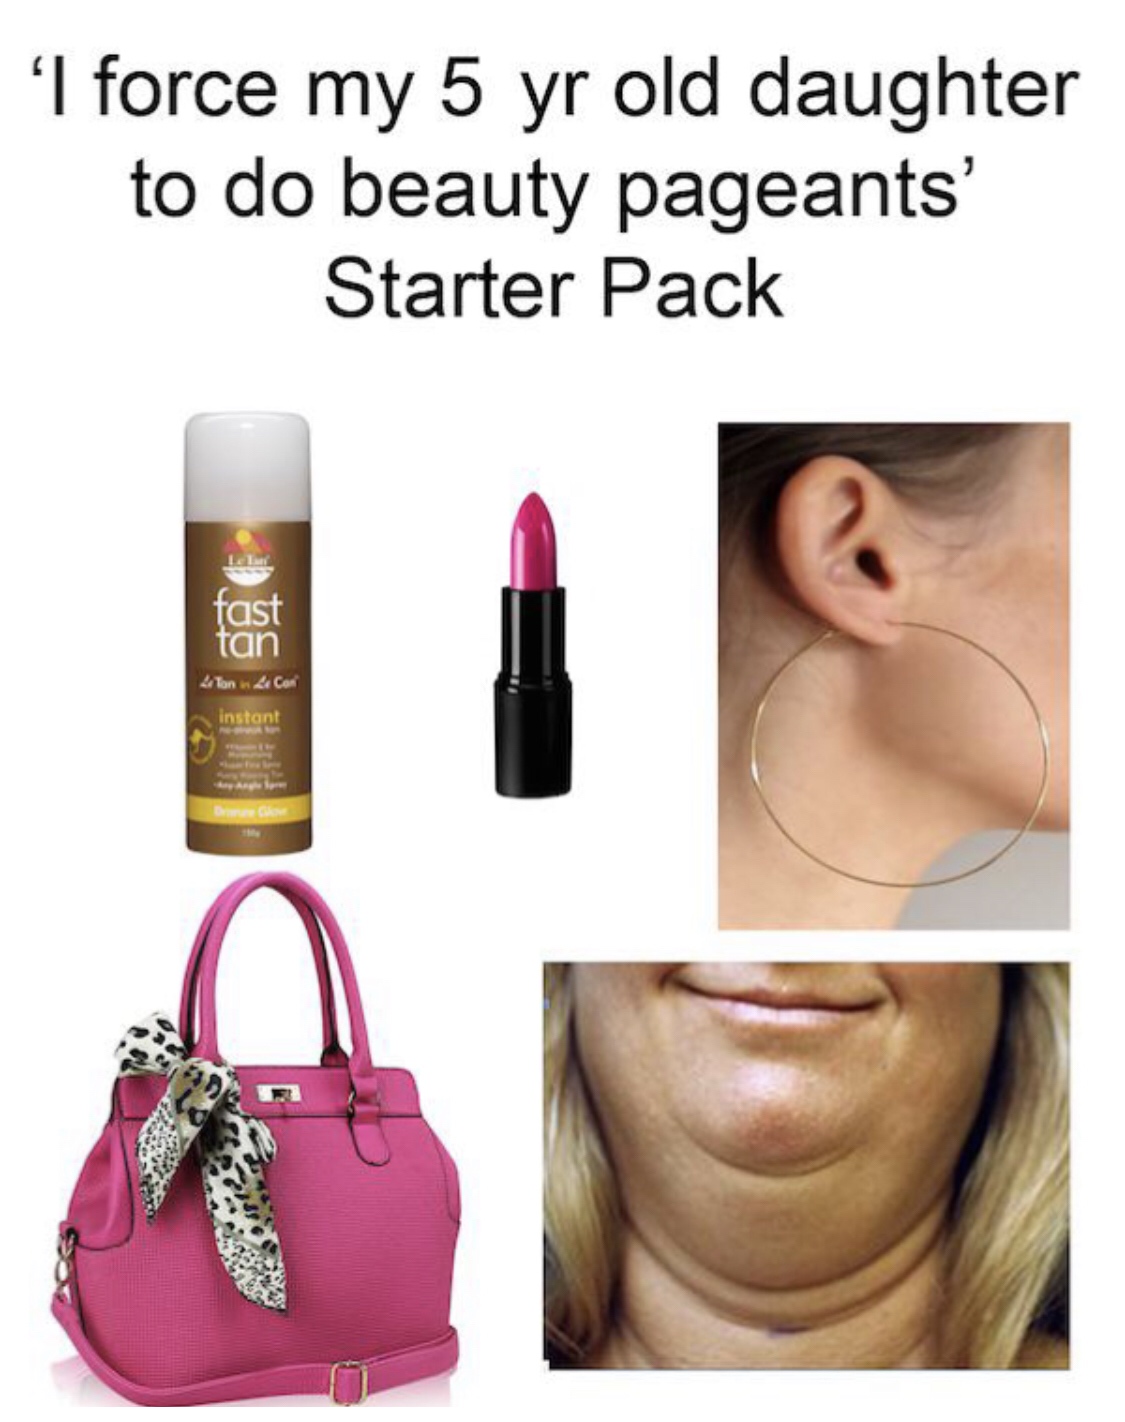 force my 5 year old daughter - 'I force my 5 yr old daughter to do beauty pageants' Starter Pack tan 2Ton 2 Con instant